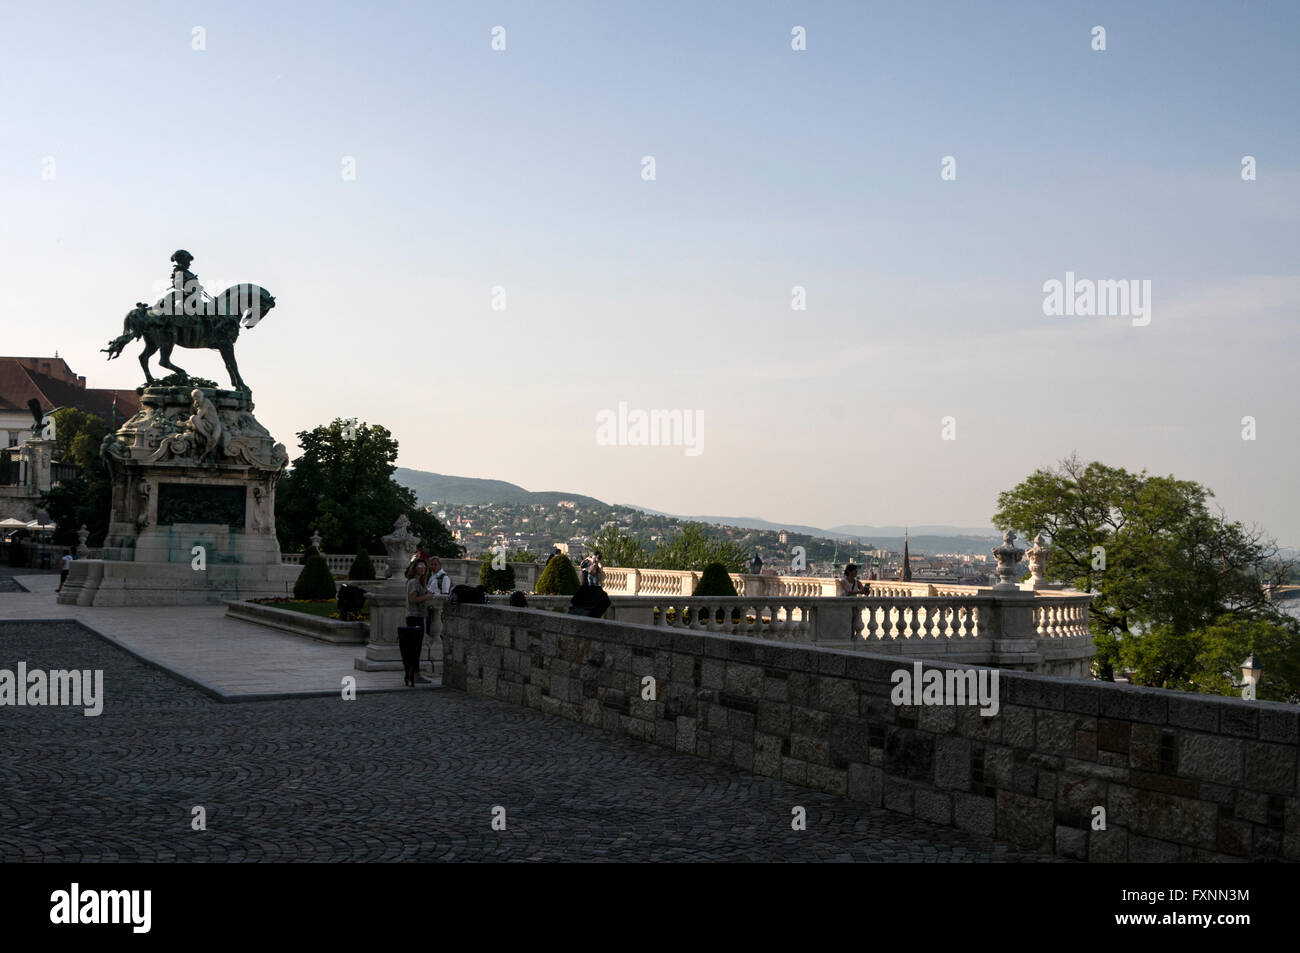 The equestrian statue of Prince Eugene of Savoy stands on the Danube terrace in front of the former Royal Palace now the Hungary Stock Photo